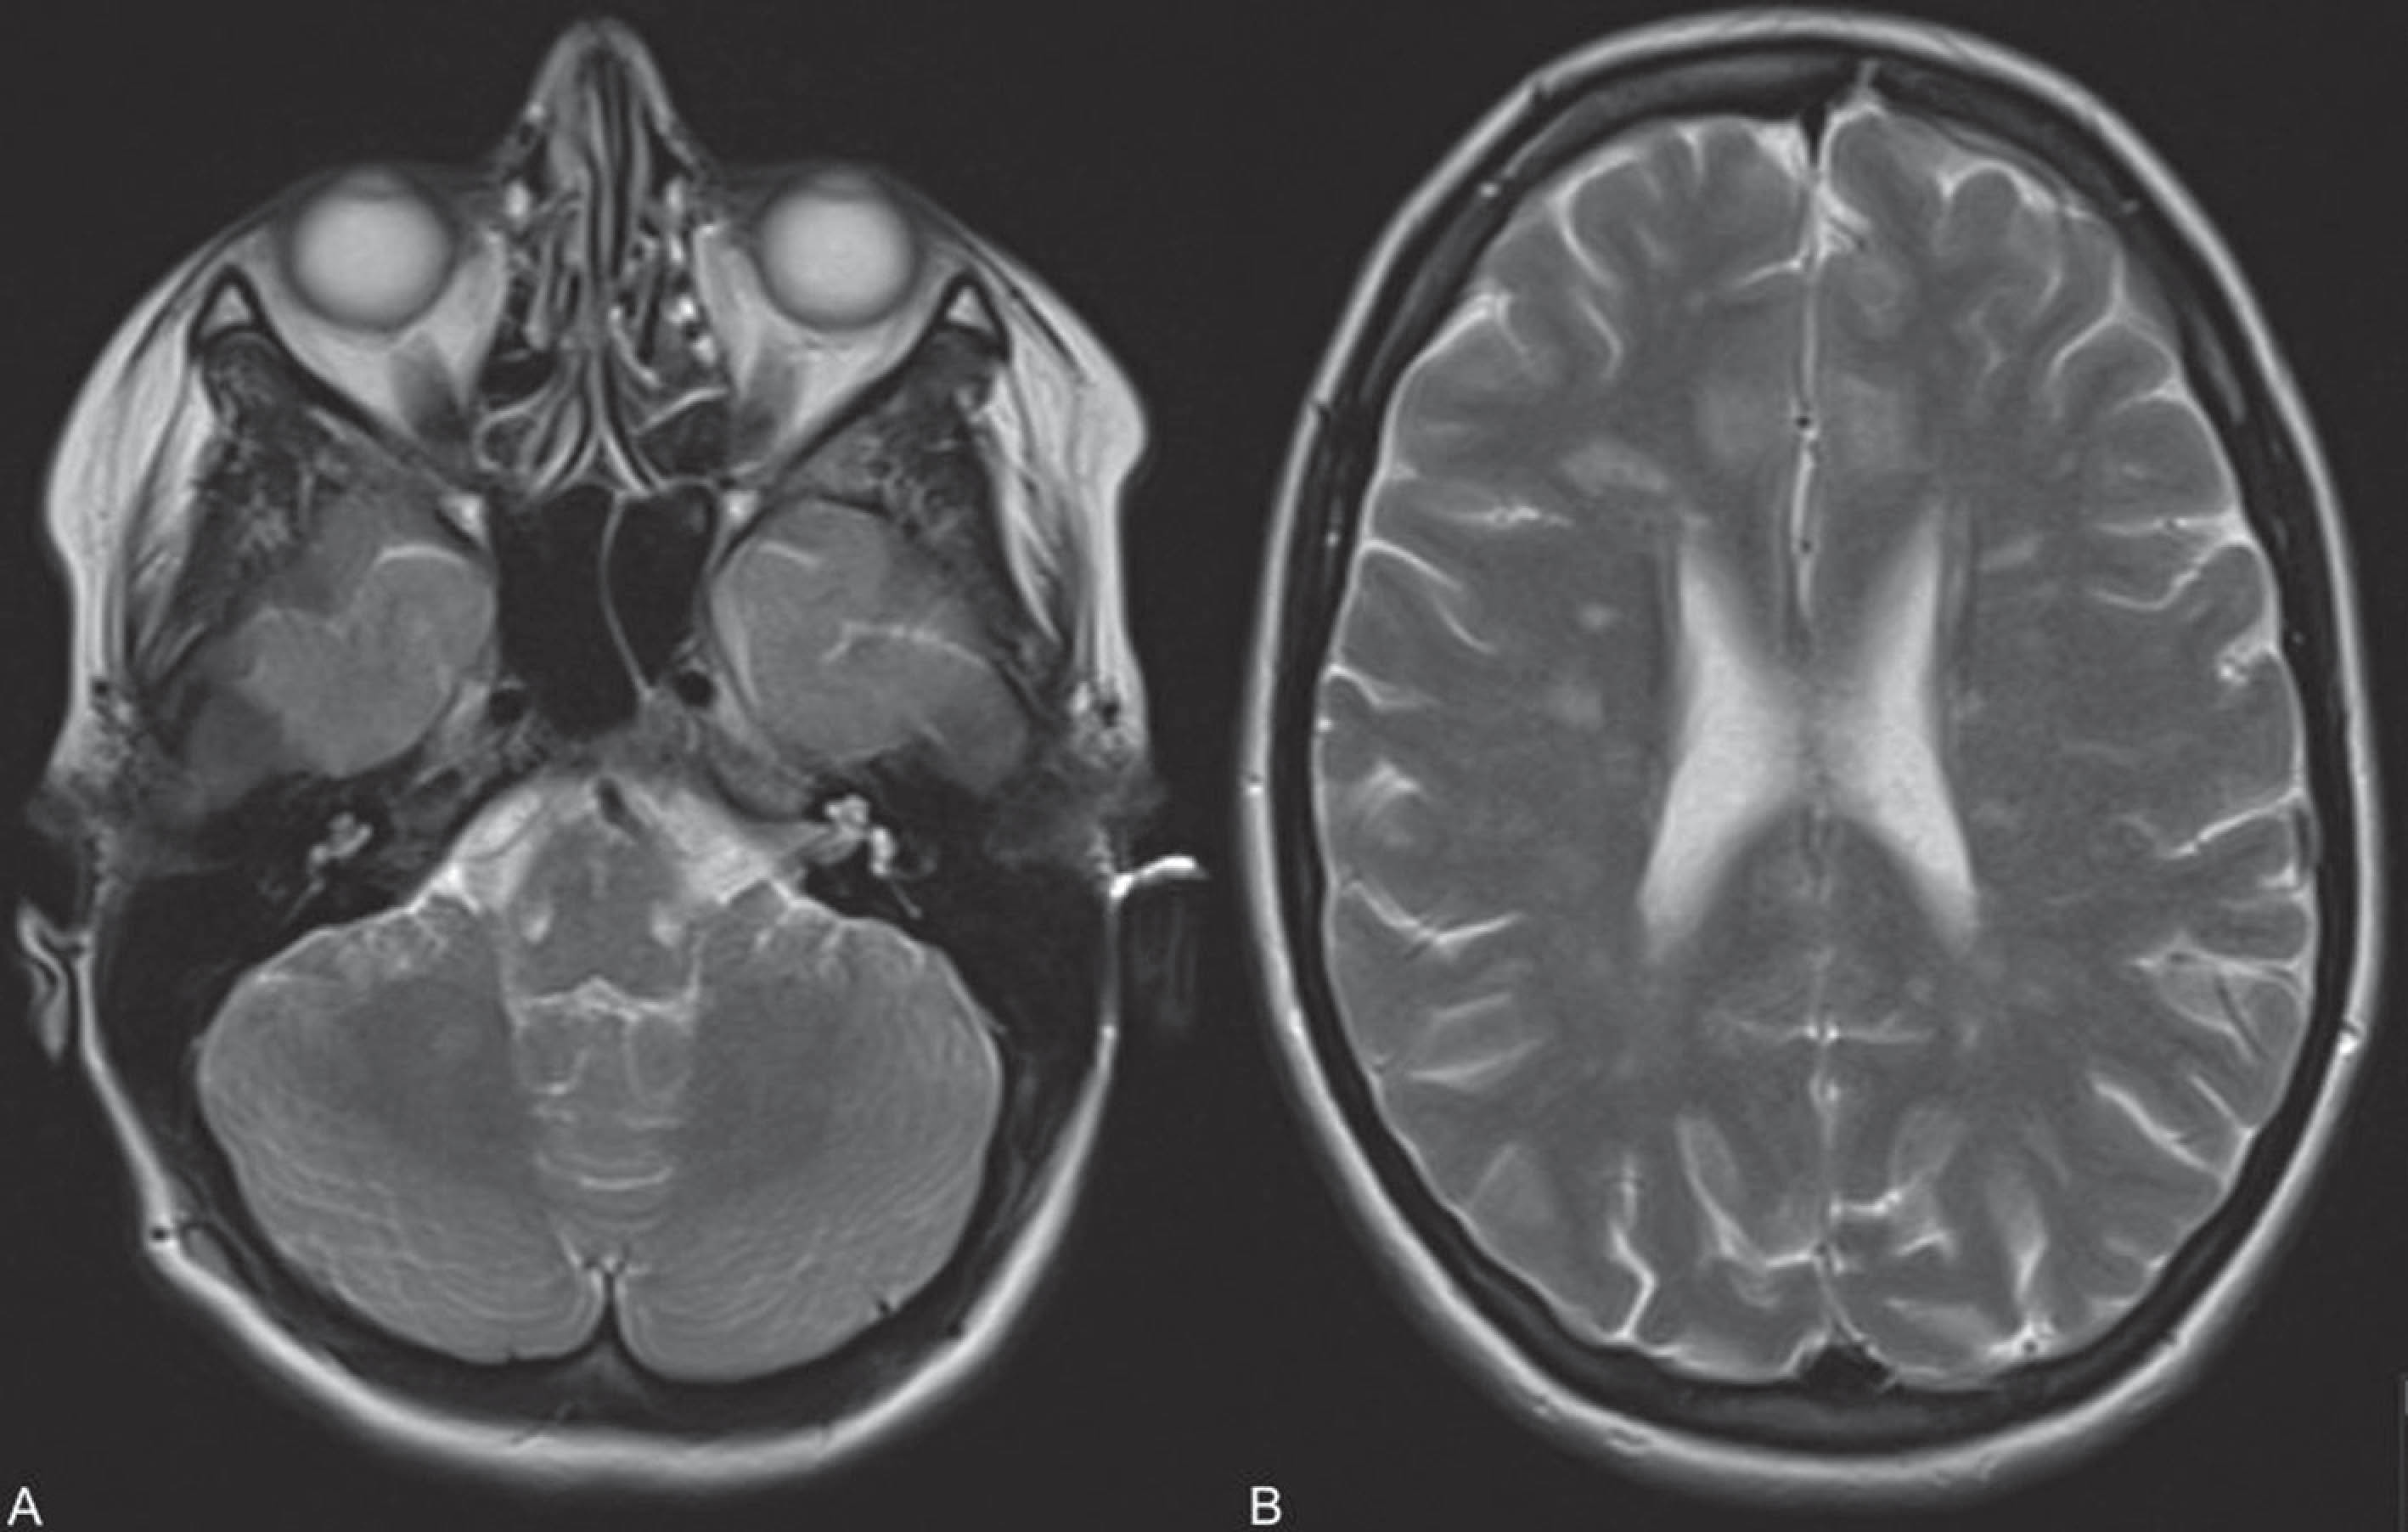 Brain MRI revealed multiple high-intensity lesions in a typical demyelinating disease topography including the right middle cerebellar peduncle (A) and the cerebellar hemisphere white matter (B).